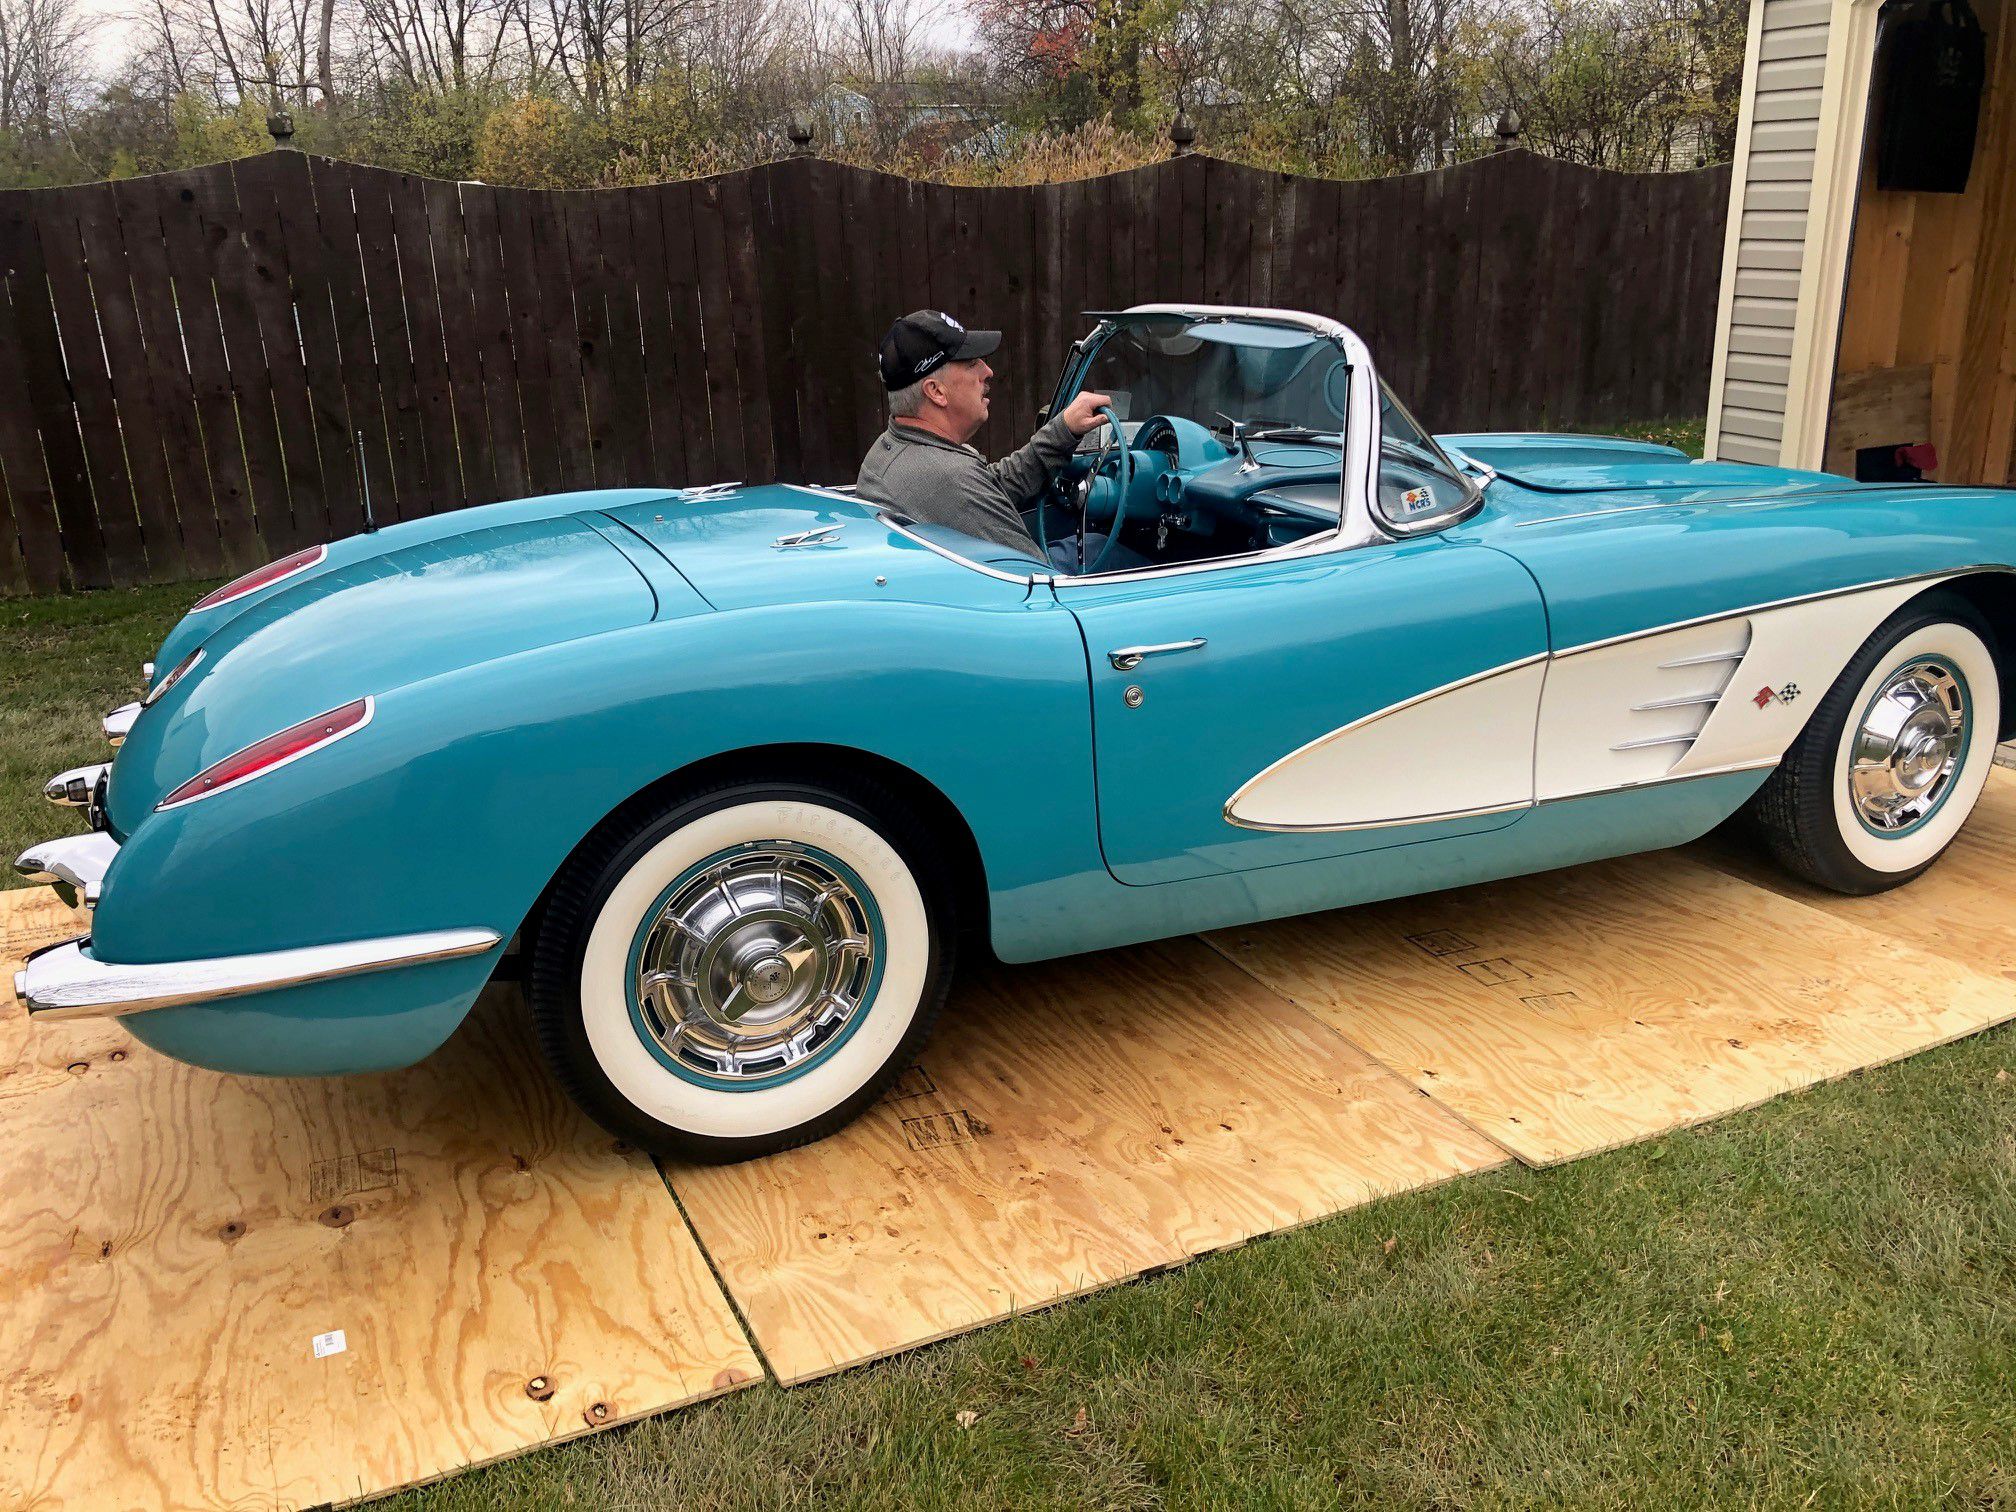 Keeping it in the family: a 1960 Corvette - syracuse.com